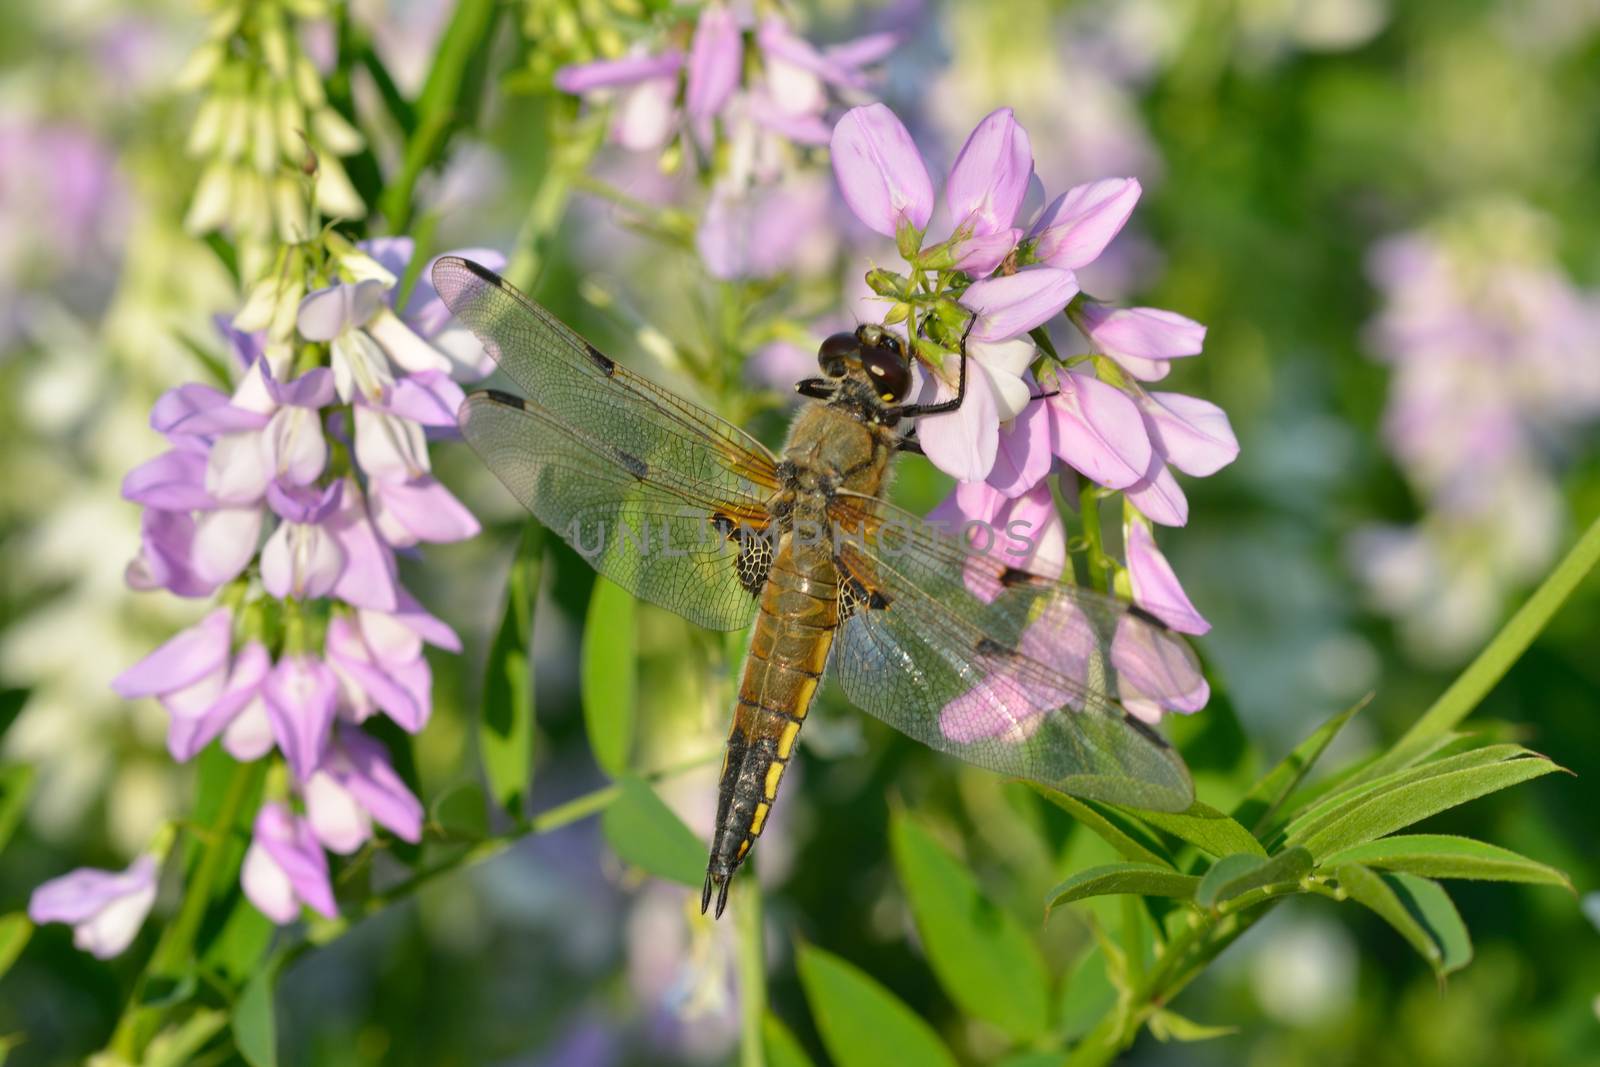 Dragonfly on flower by pauws99